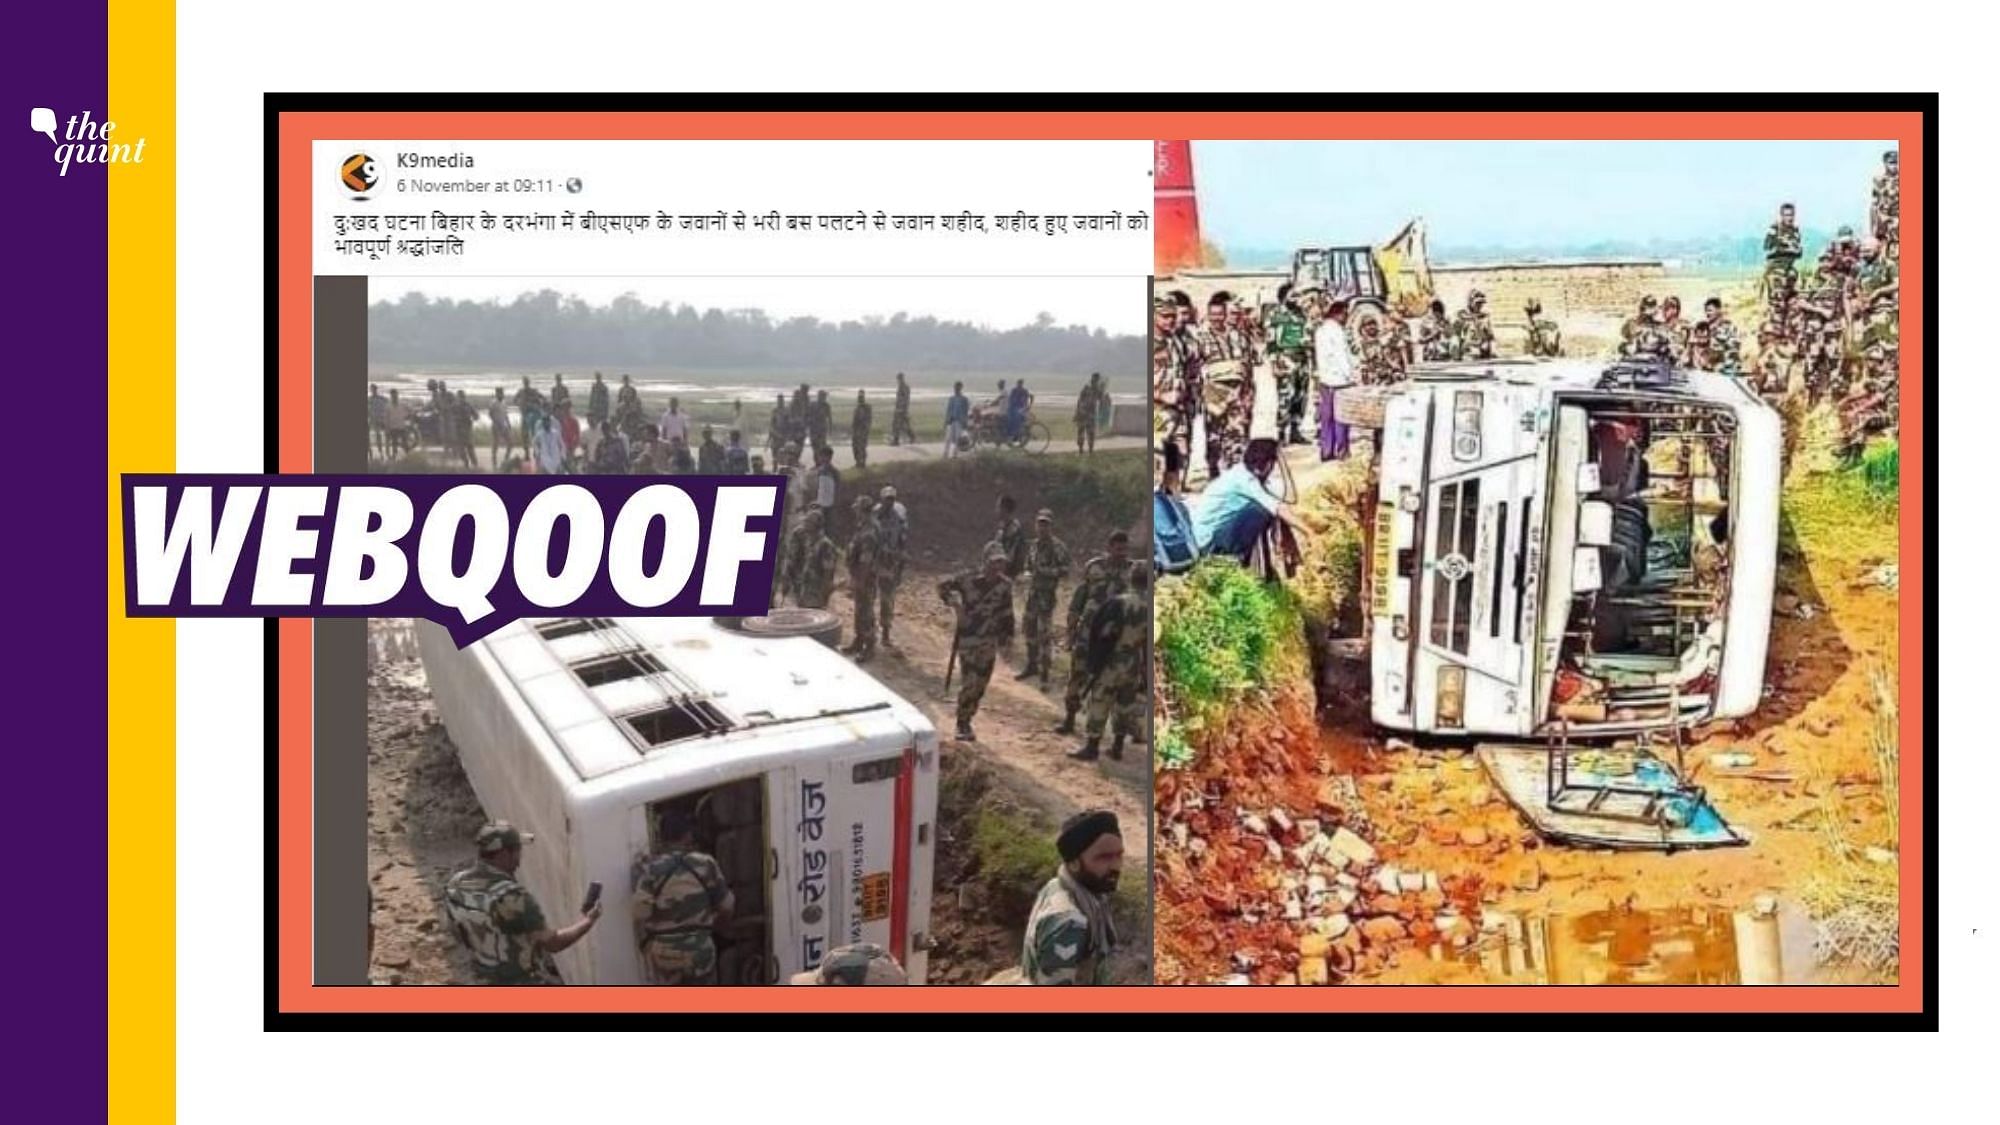 BSF Personnel Bus Accident Fact Check While a bus with BSF personnel did overturn in Darbhanga on 4 November, there were no deaths in the accident.